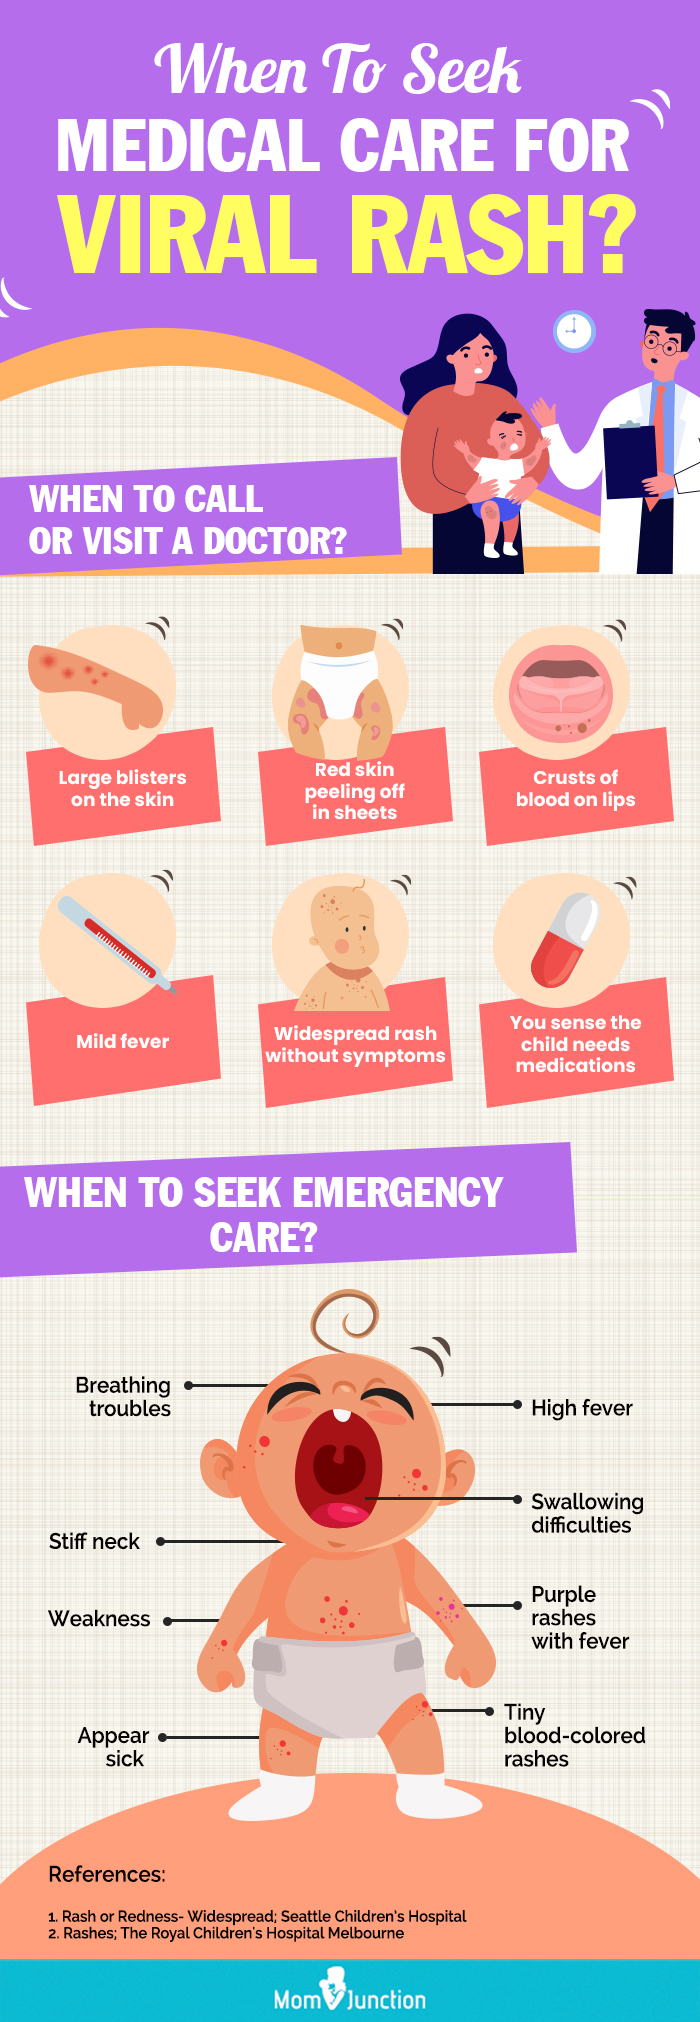 when to seek medical care for viral rash [infographic]